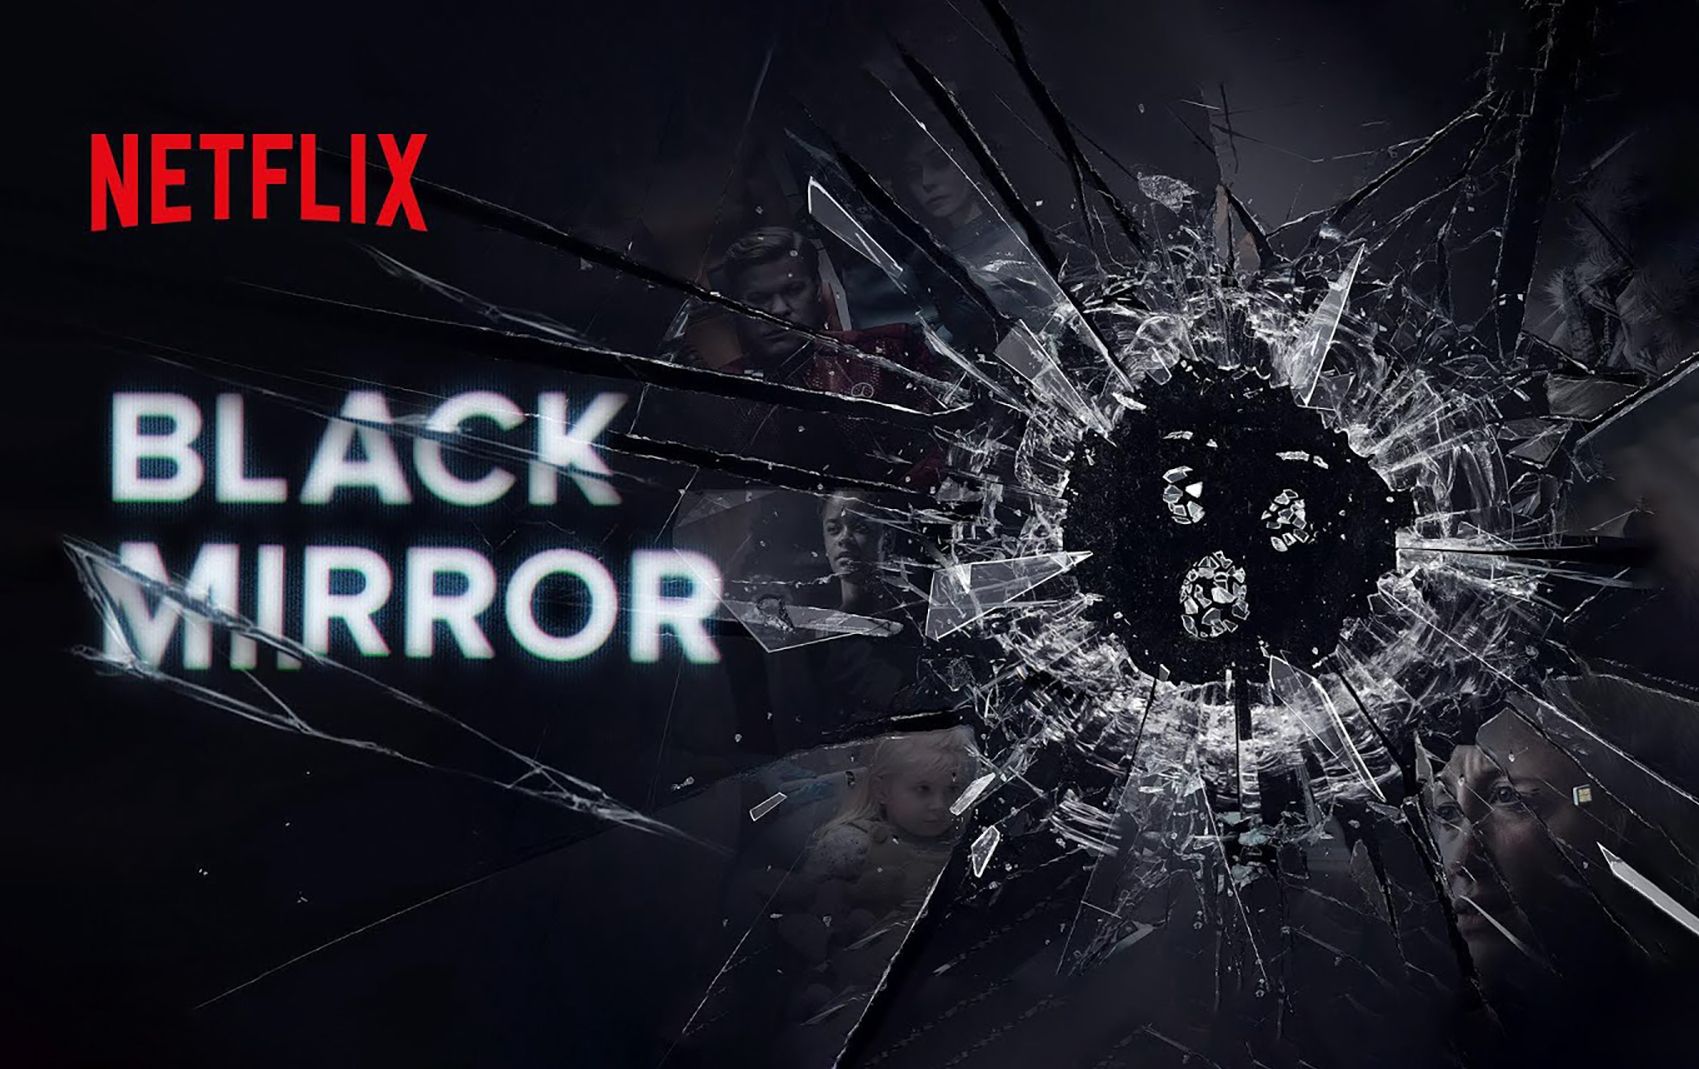 161152 Tv News Black Mirror S Season 6 Is Finally In The Works Set To Return To Netflix Image1 Napdcbfxhy 